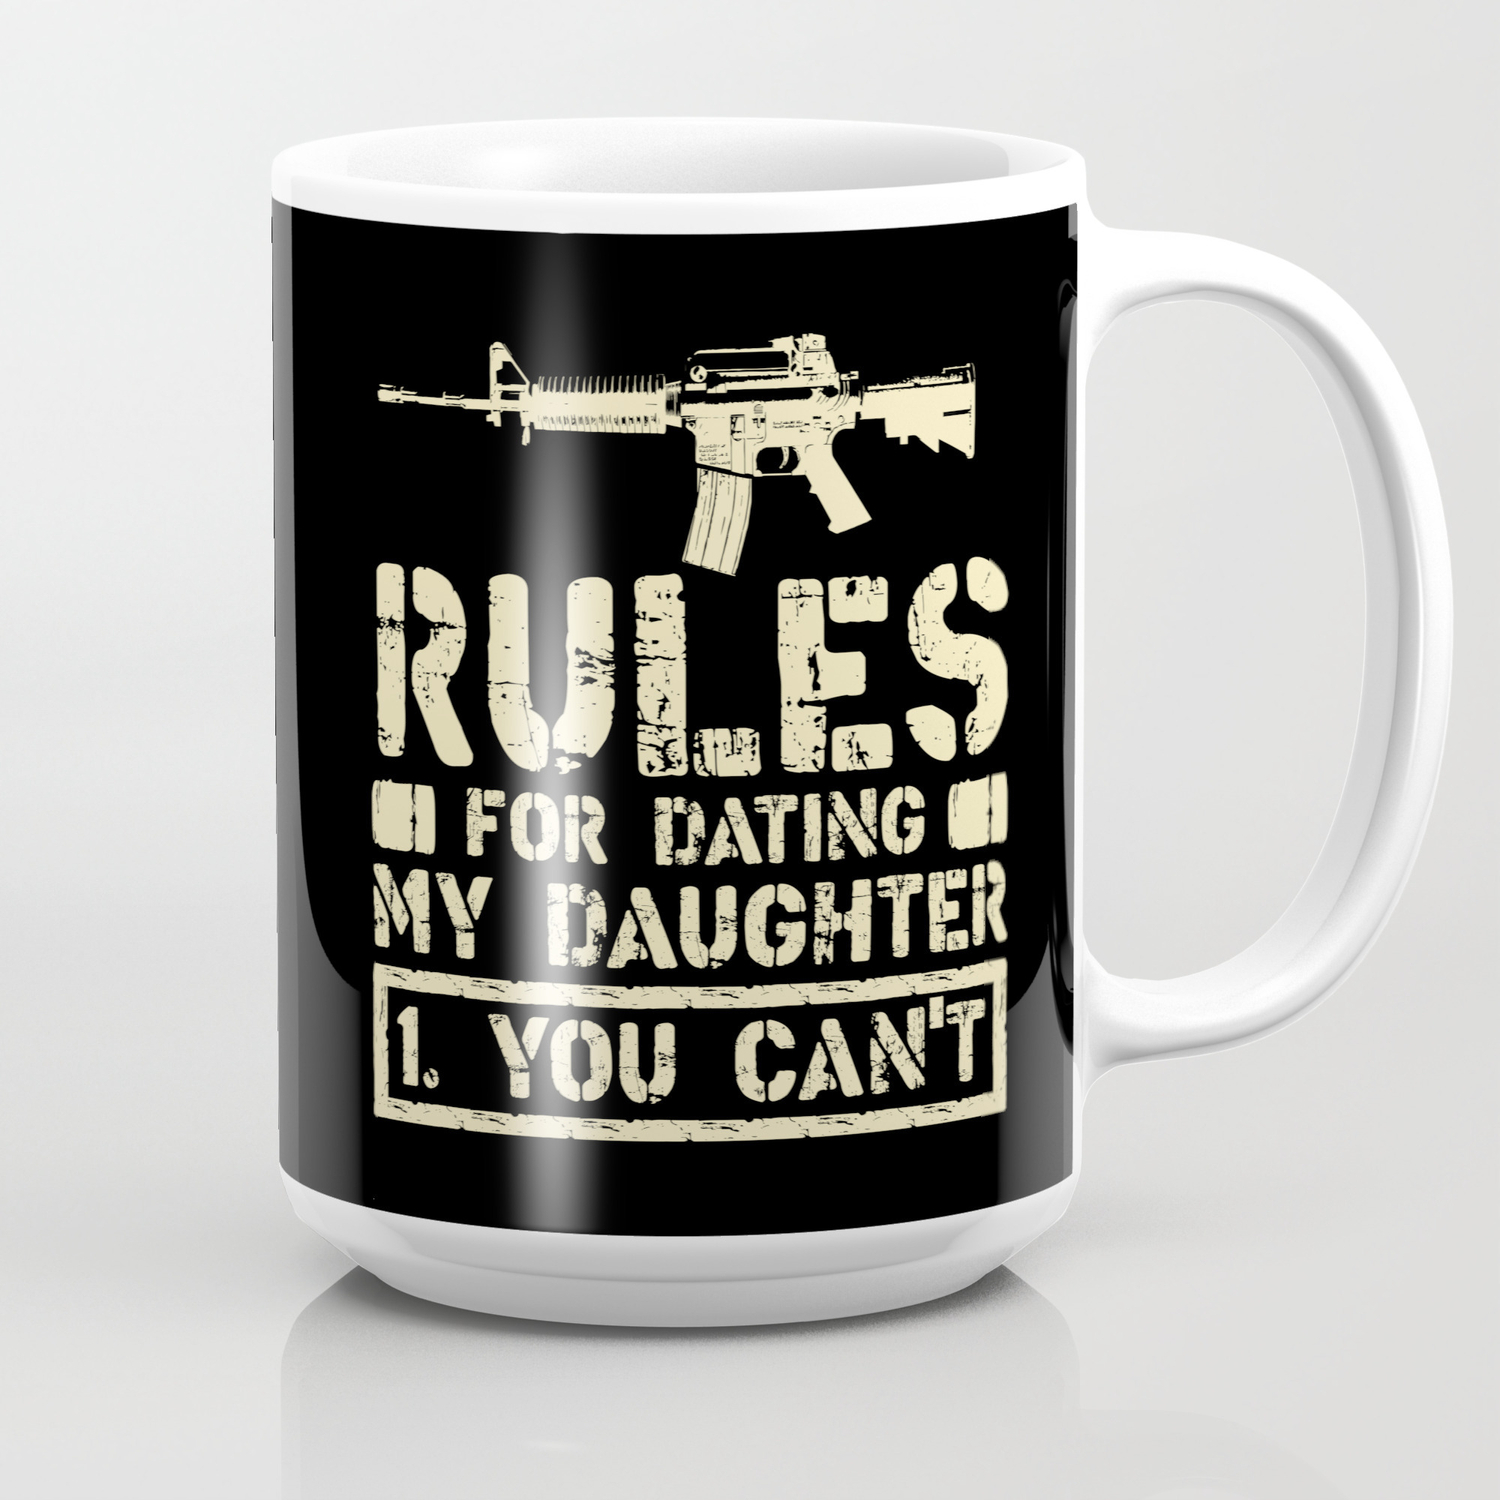 DADD Dad Against Daughters Dating Date BF Funny Humor Ceramic White Coffee Mug 